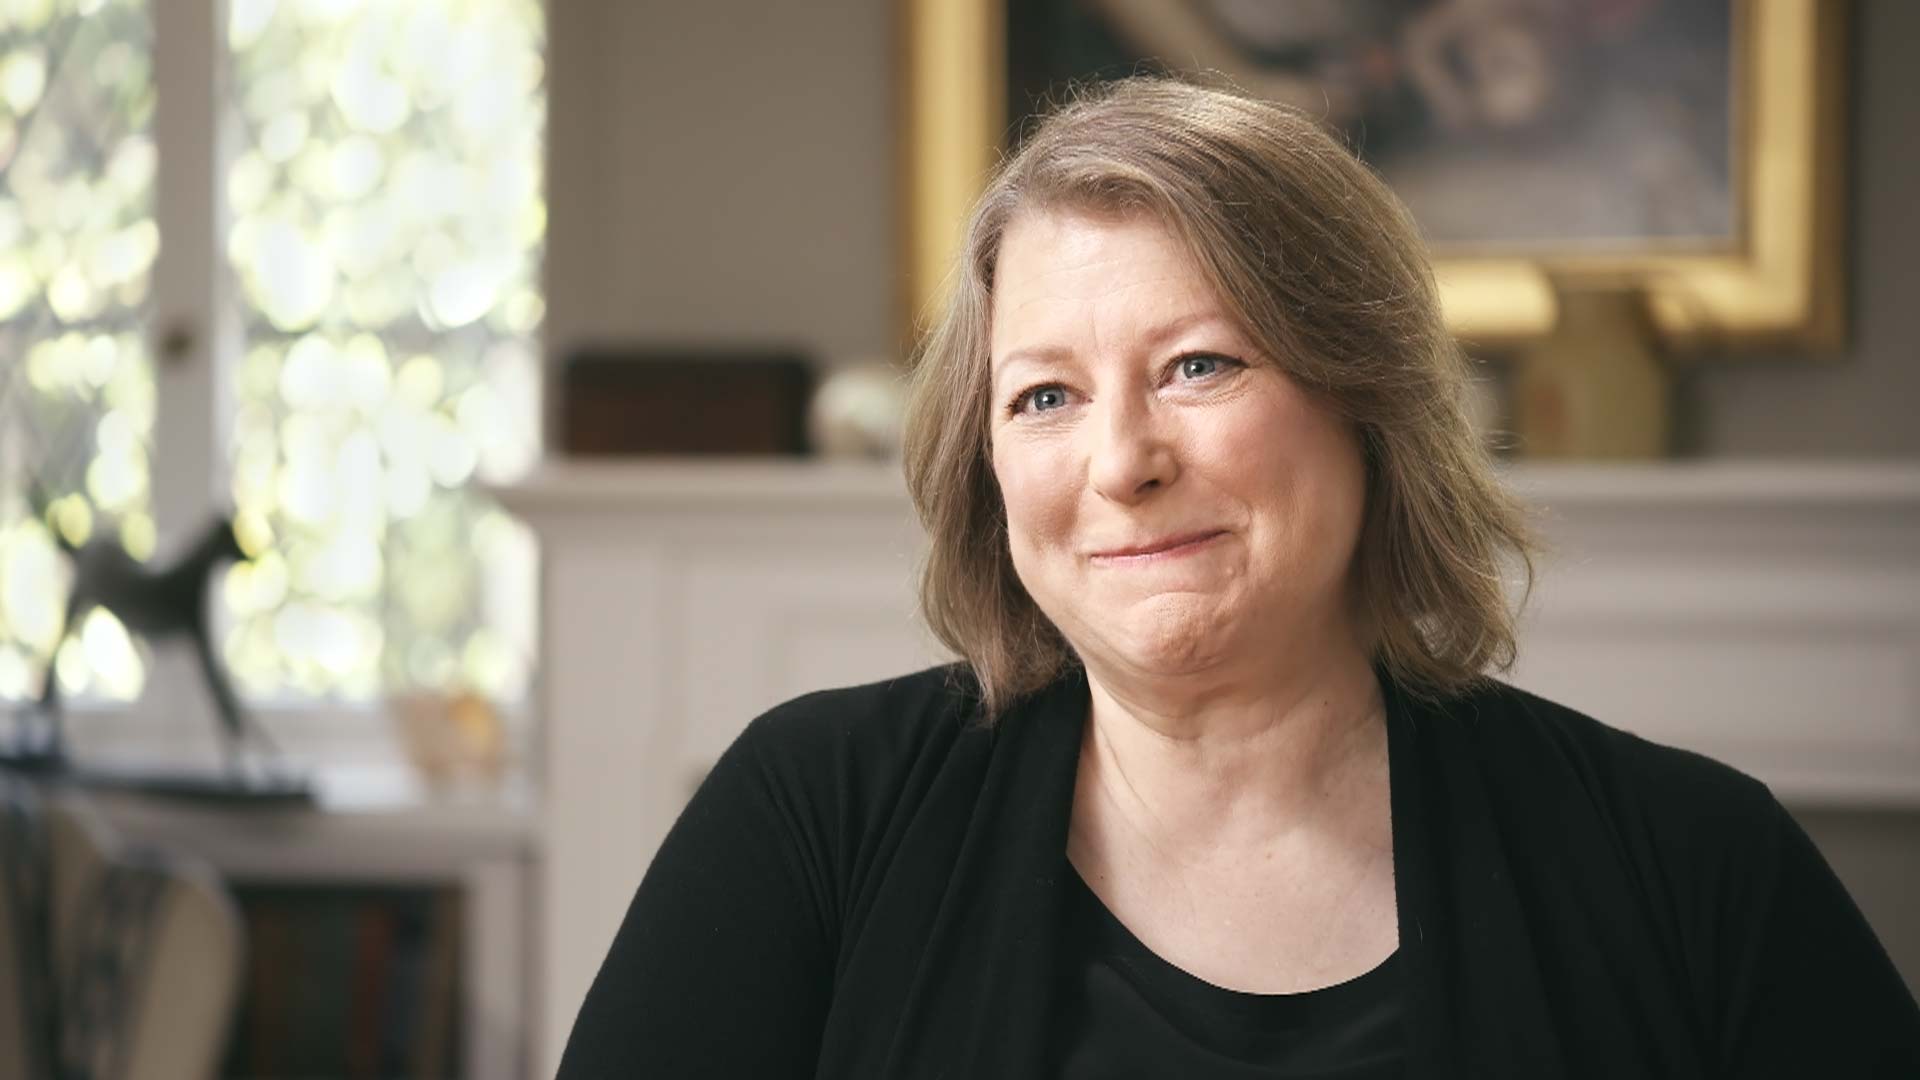 A Discovery of Witches: Author's Notes With Deborah Harkness Season 1 Episode 4 - Fan Questions